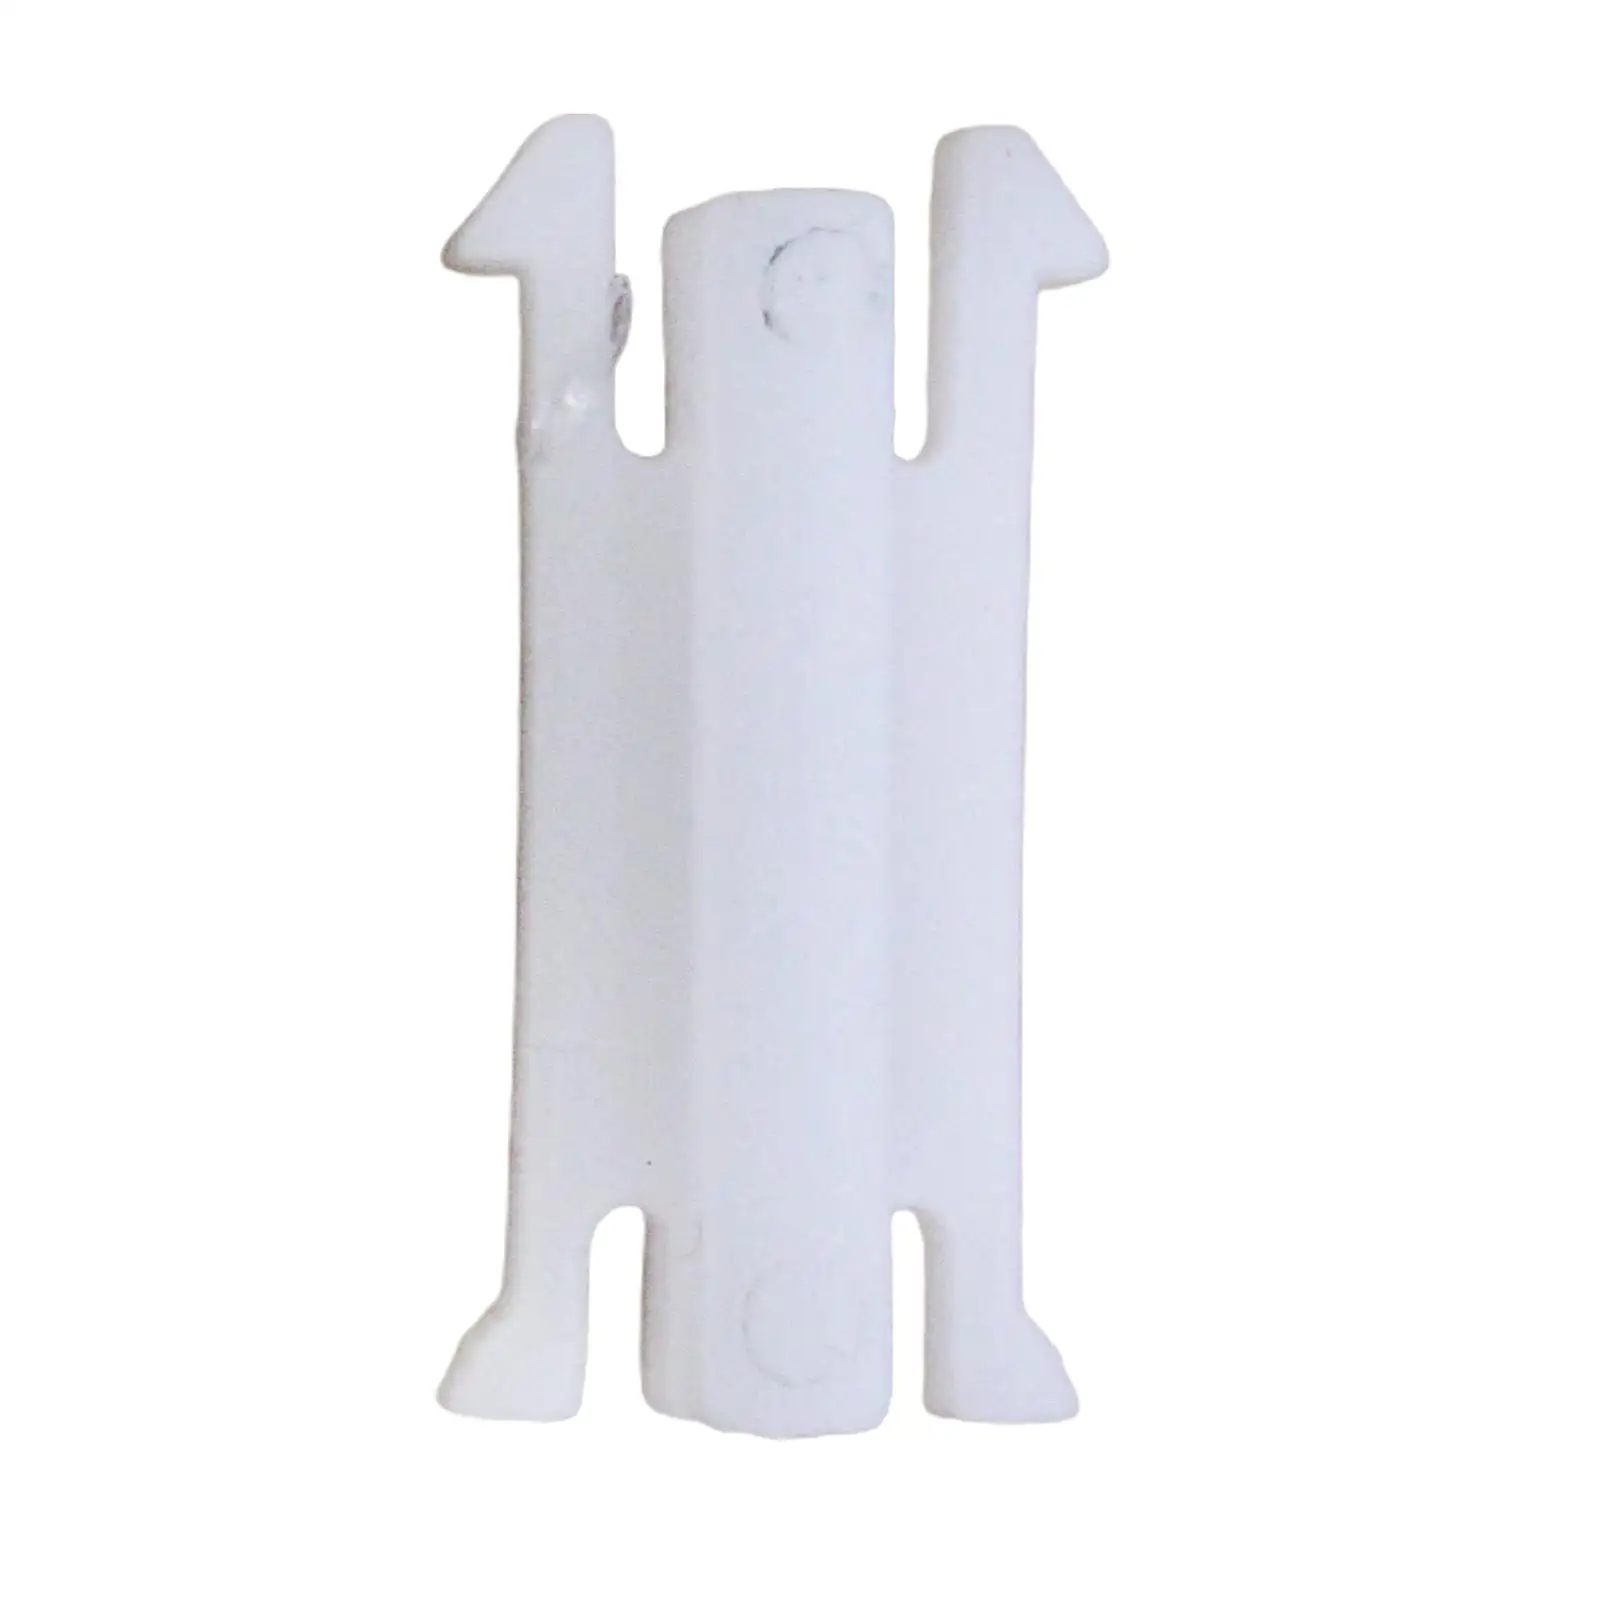 New Auto Car Bonnet Lock Catch Cable Clip Clamp 4549268 Fits for Ford Focus & C-Max 2004 -2011 Accessories White